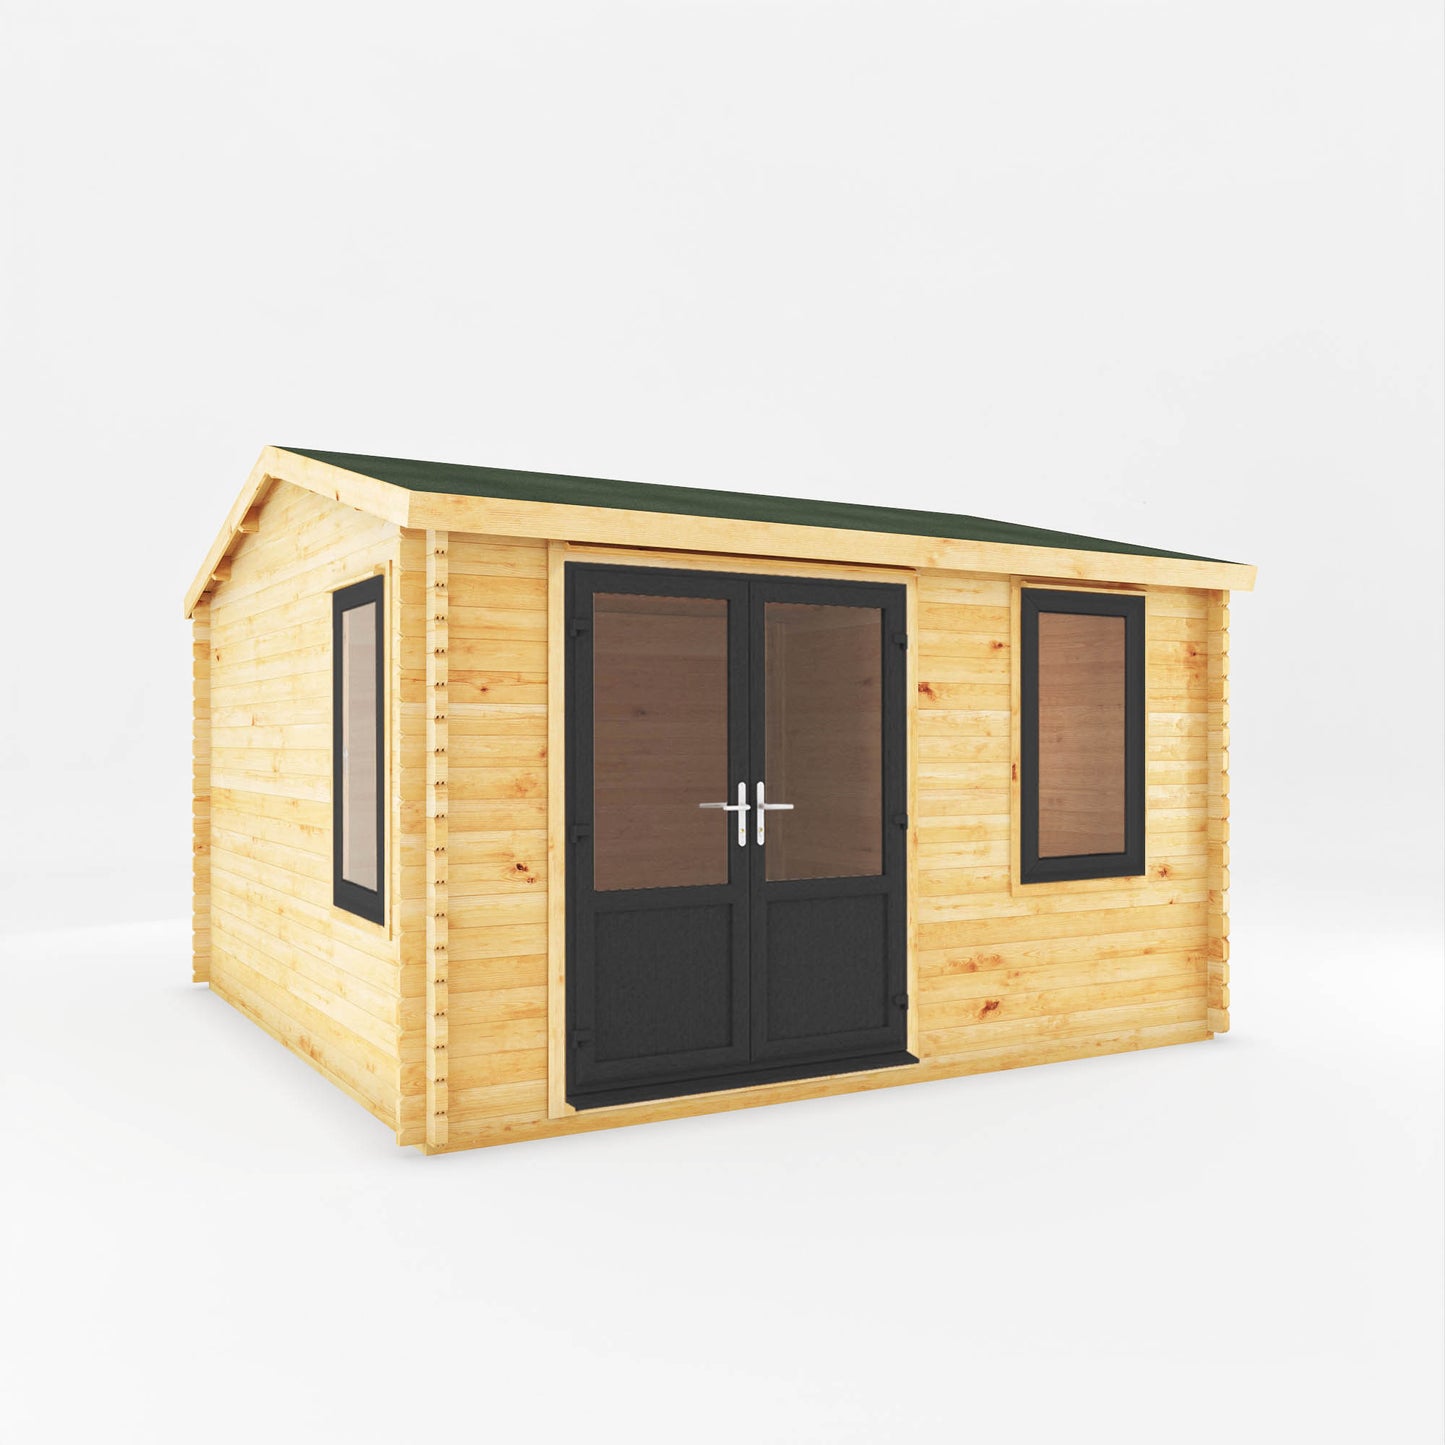 The 4m x 4m Robin Log Cabin with Anthracite UPVC